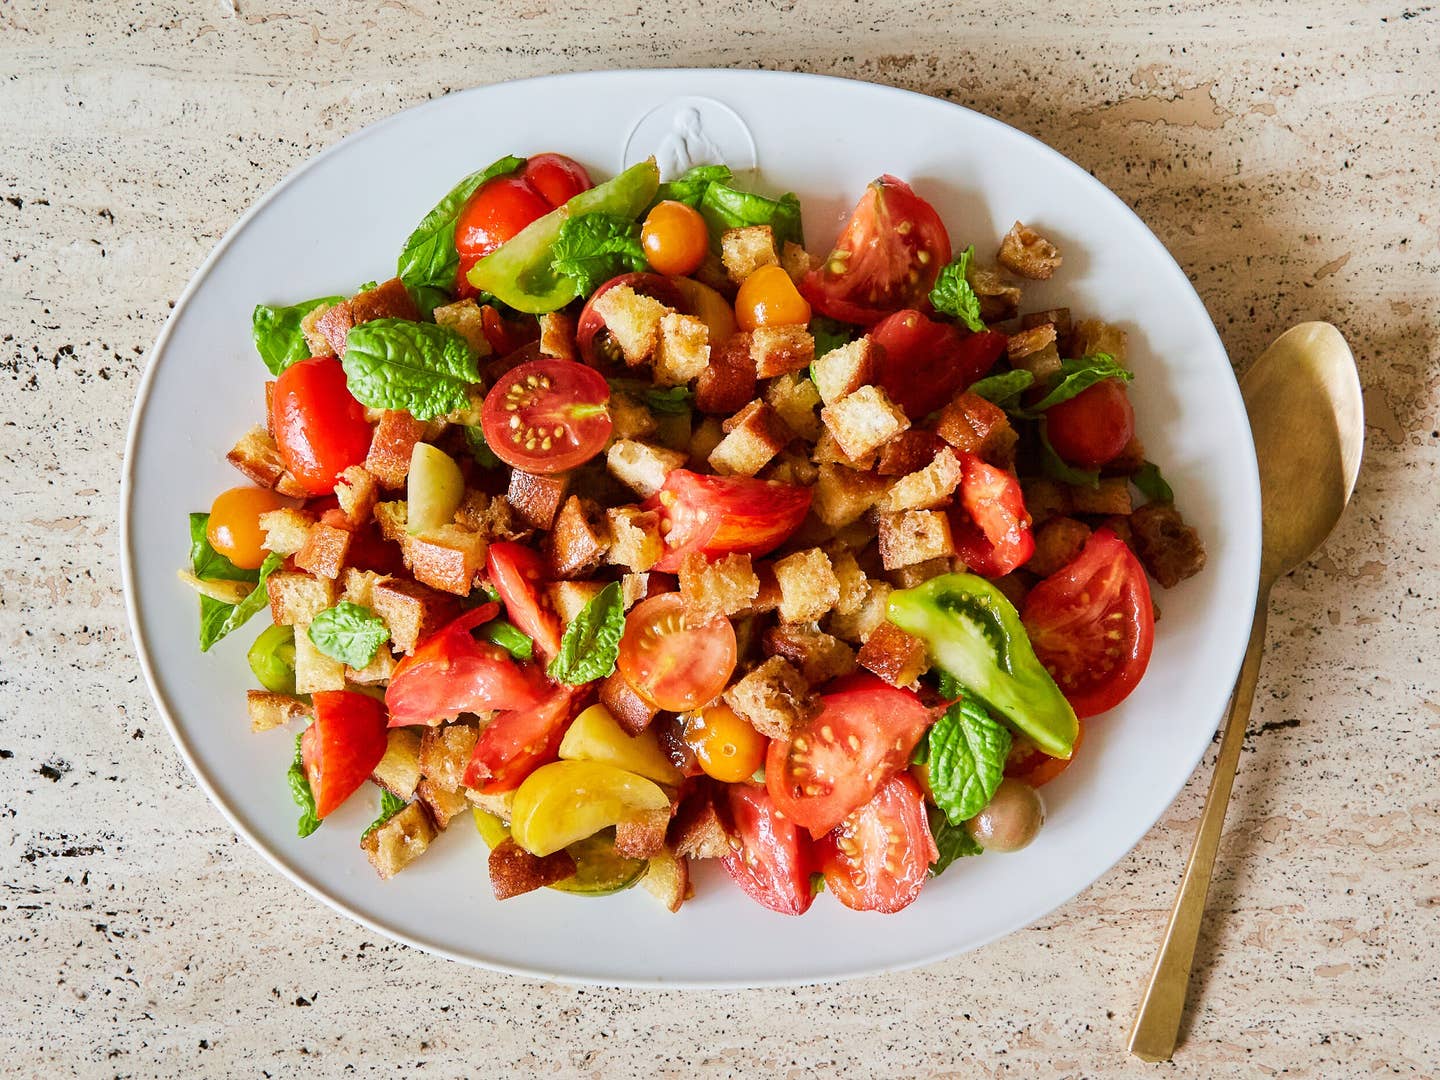 Seize the Summer with Our Top 12 Tomato Recipes